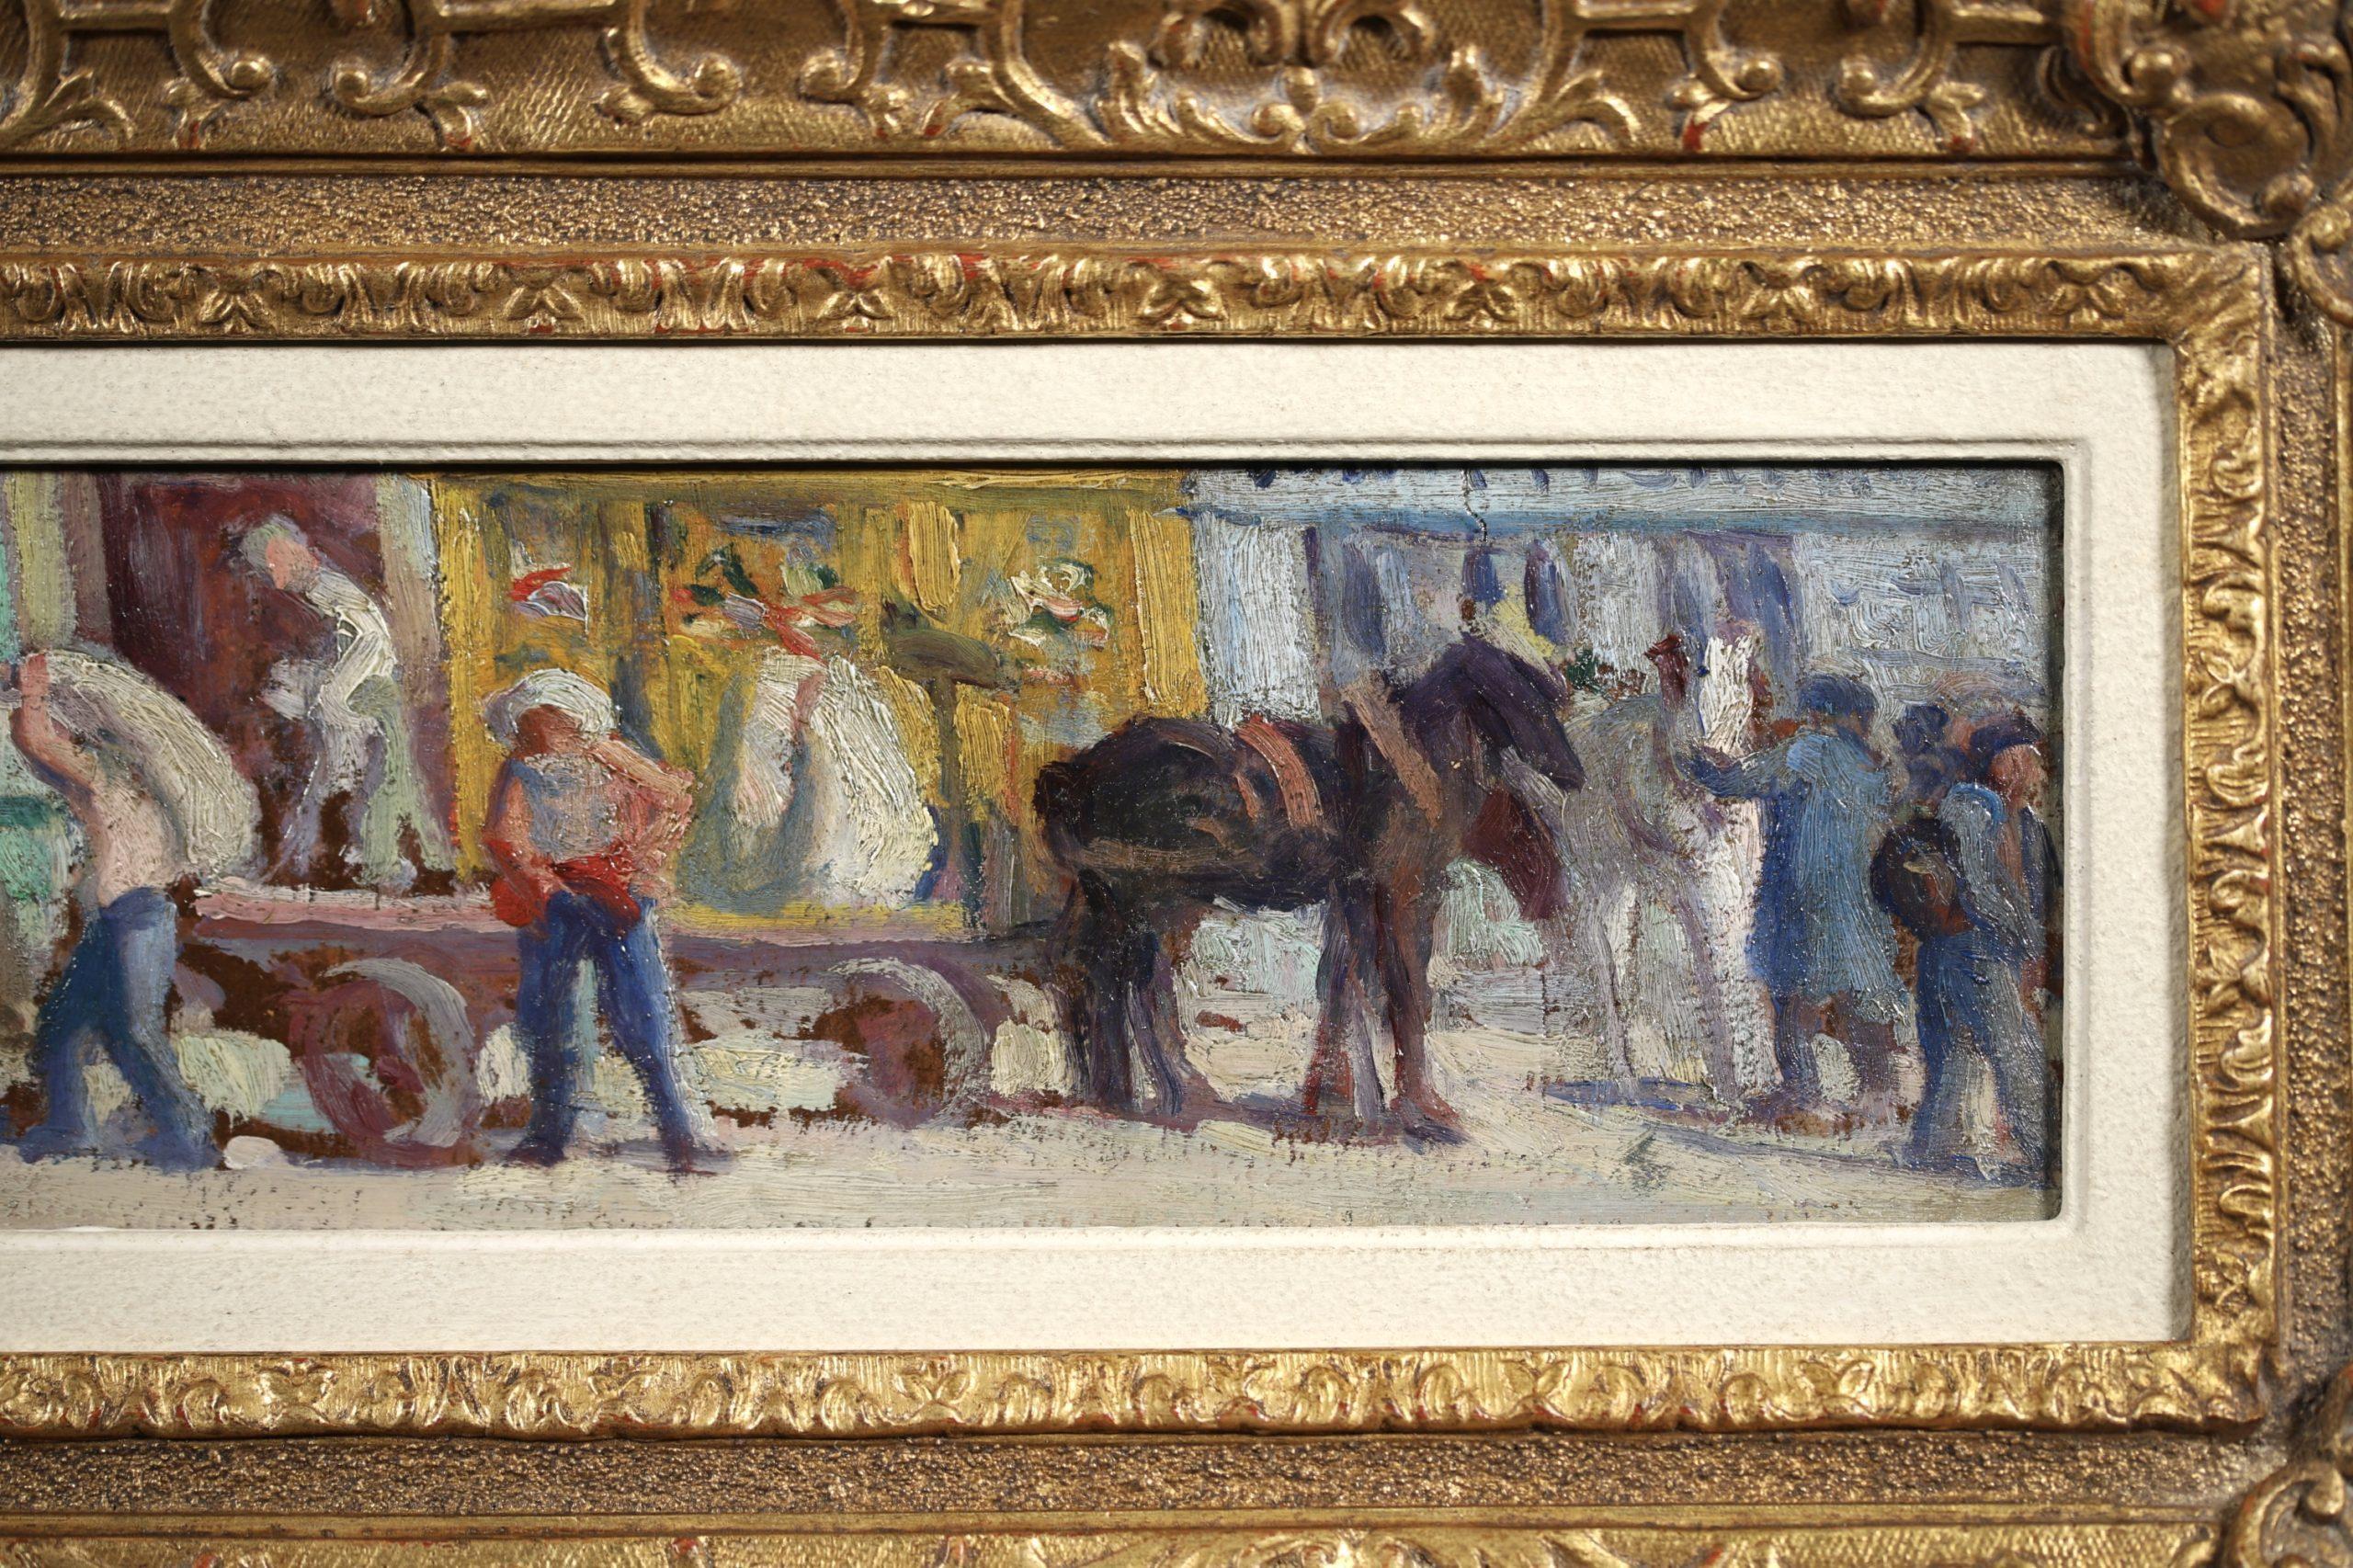 Signed figures in landscape oil on board circa 1908 by French impressionist painter Maximilien Luce. The piece depicts workers on the Rue de Paris in Saint-Denis, a commune in the northern suburbs of Paris, France. The workers are unloading their